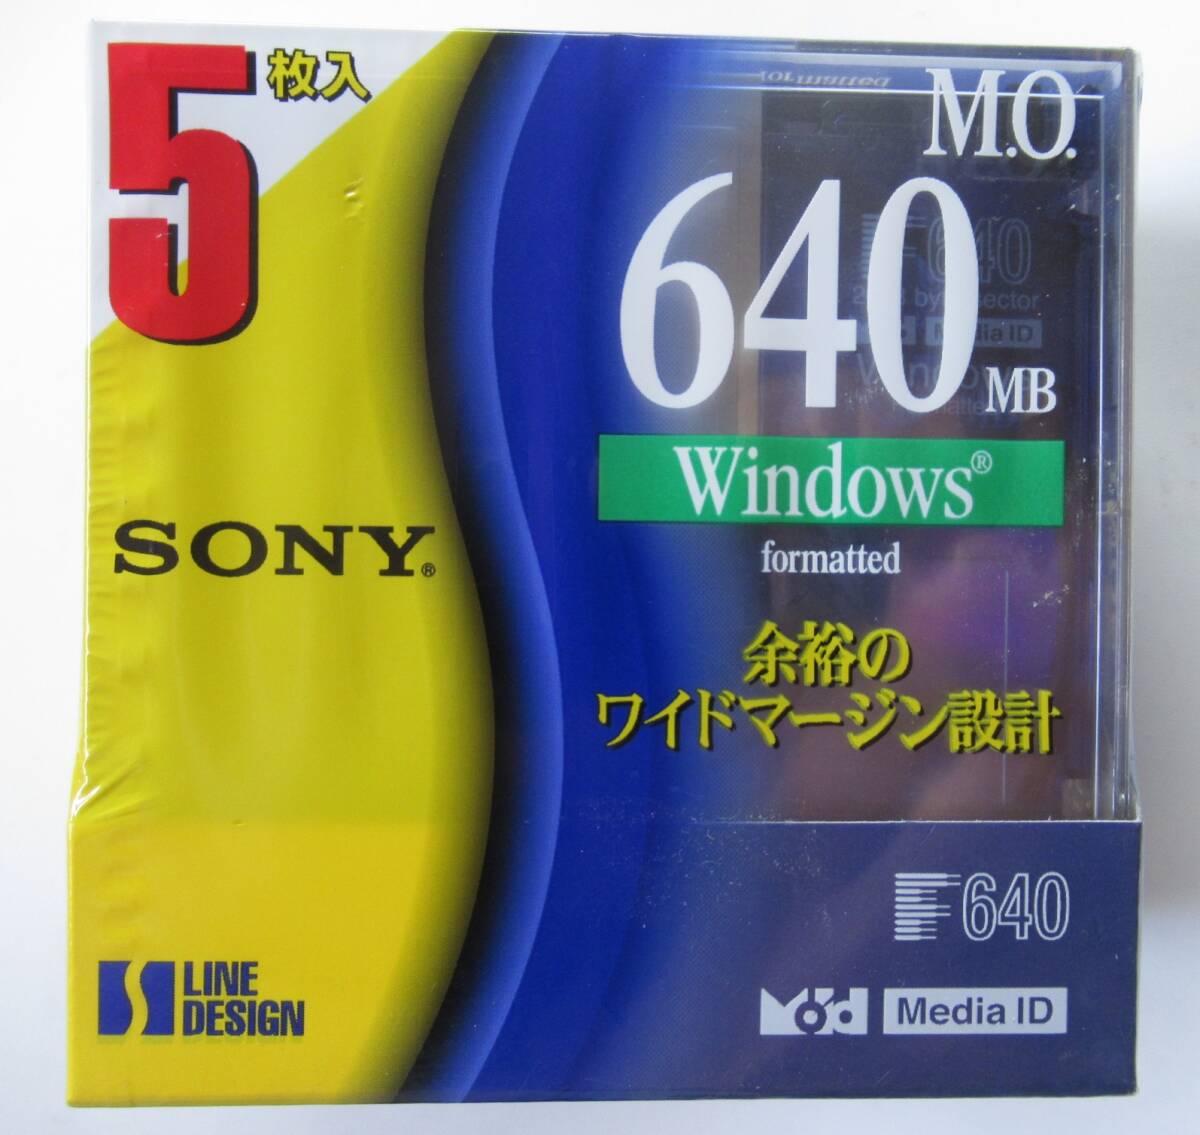 SONY 3.5 type MO disk 1 case 5 sheets insertion 640MB Windows format 5EDM-640CDF / made in Japan production end goods stock limit 